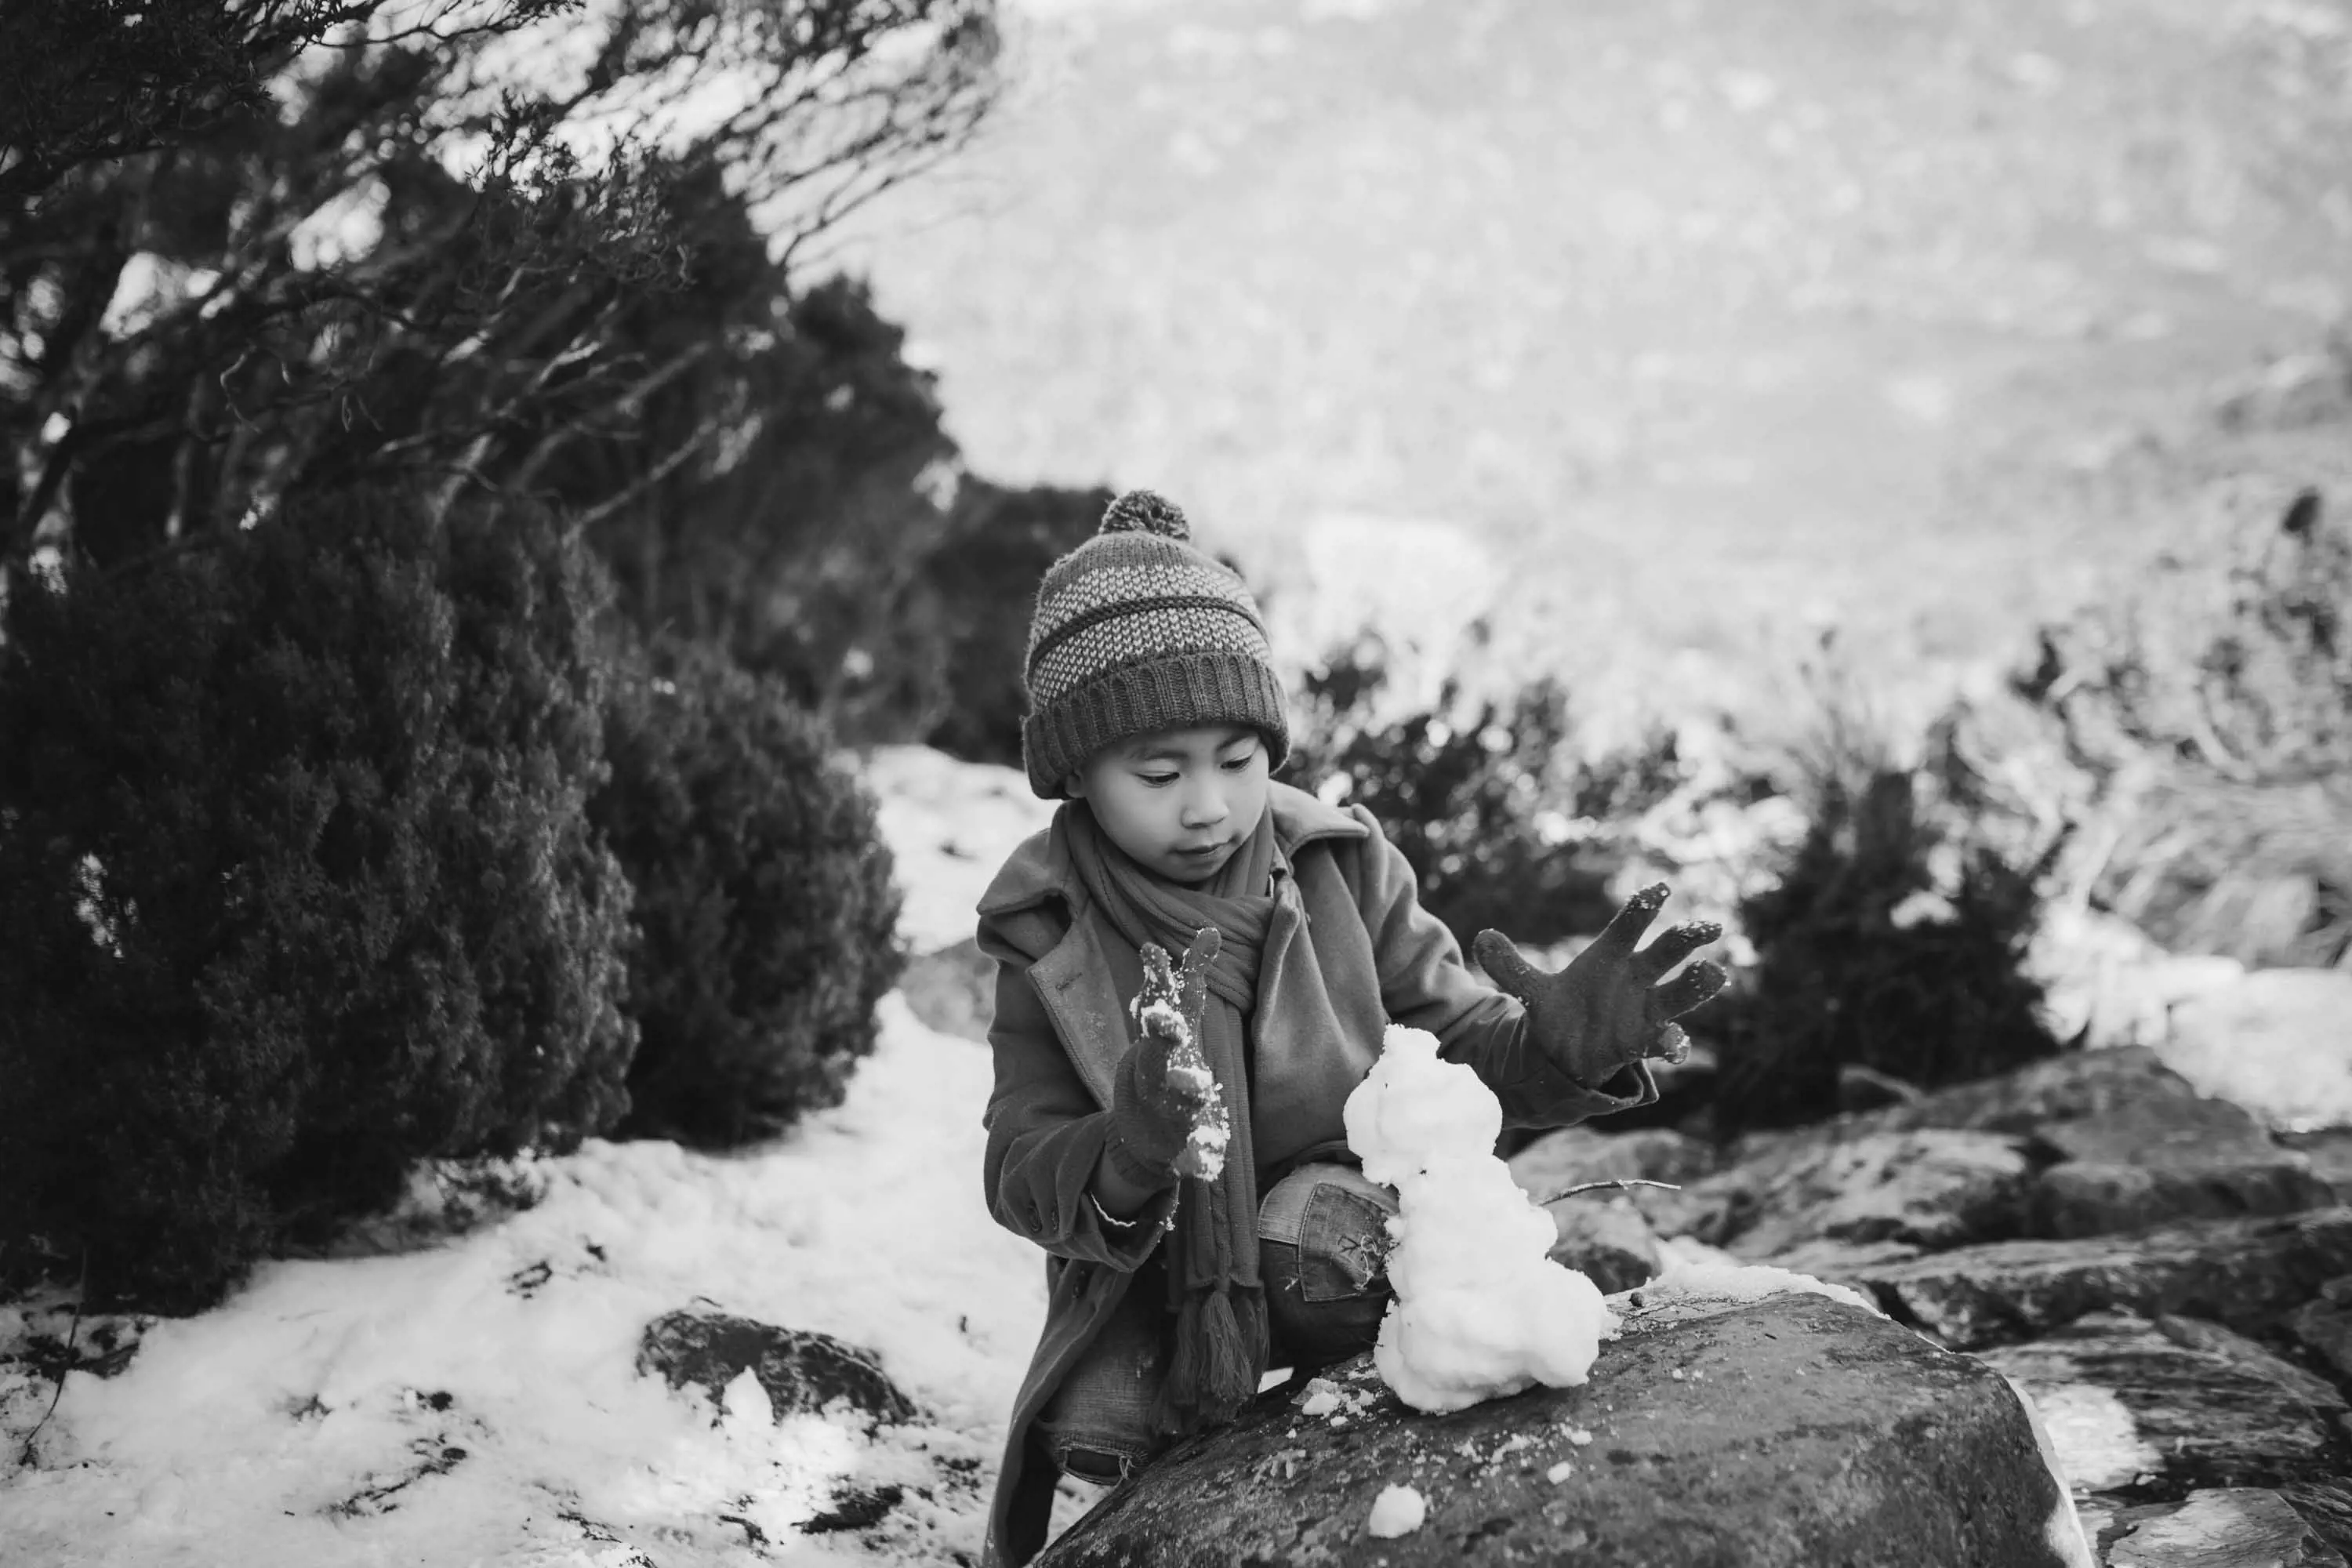 A young boy wearing a knitted beanie and a heavy winter coat makes a snow man on a large stone.